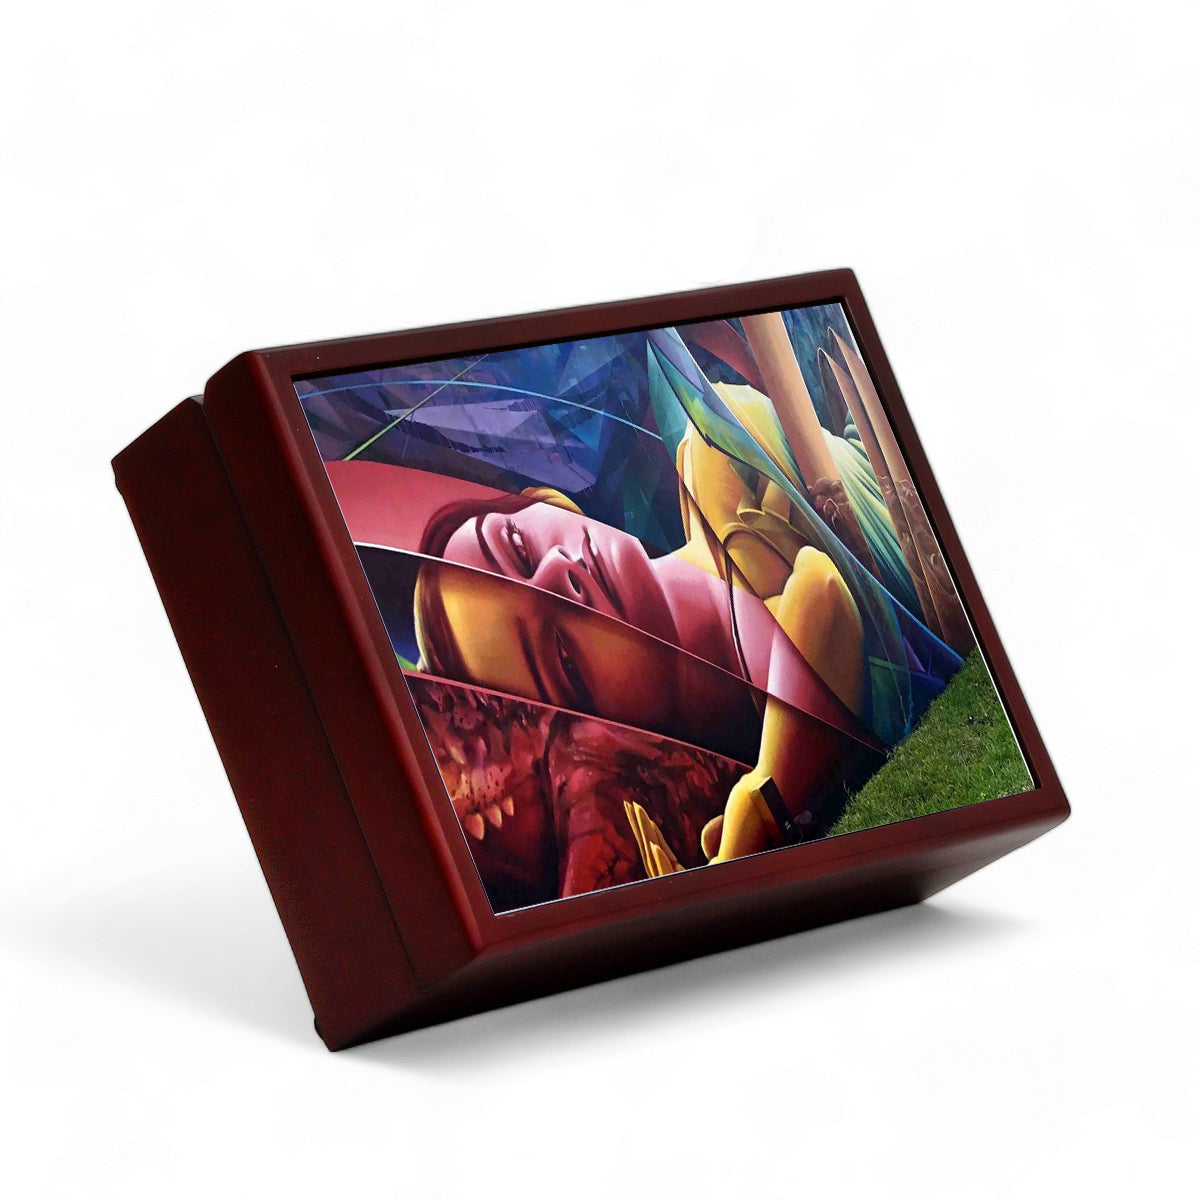 WOOD BOXES COLLECTION: Lined large wood box with printed tile - Opera "Winwood Inspiration"